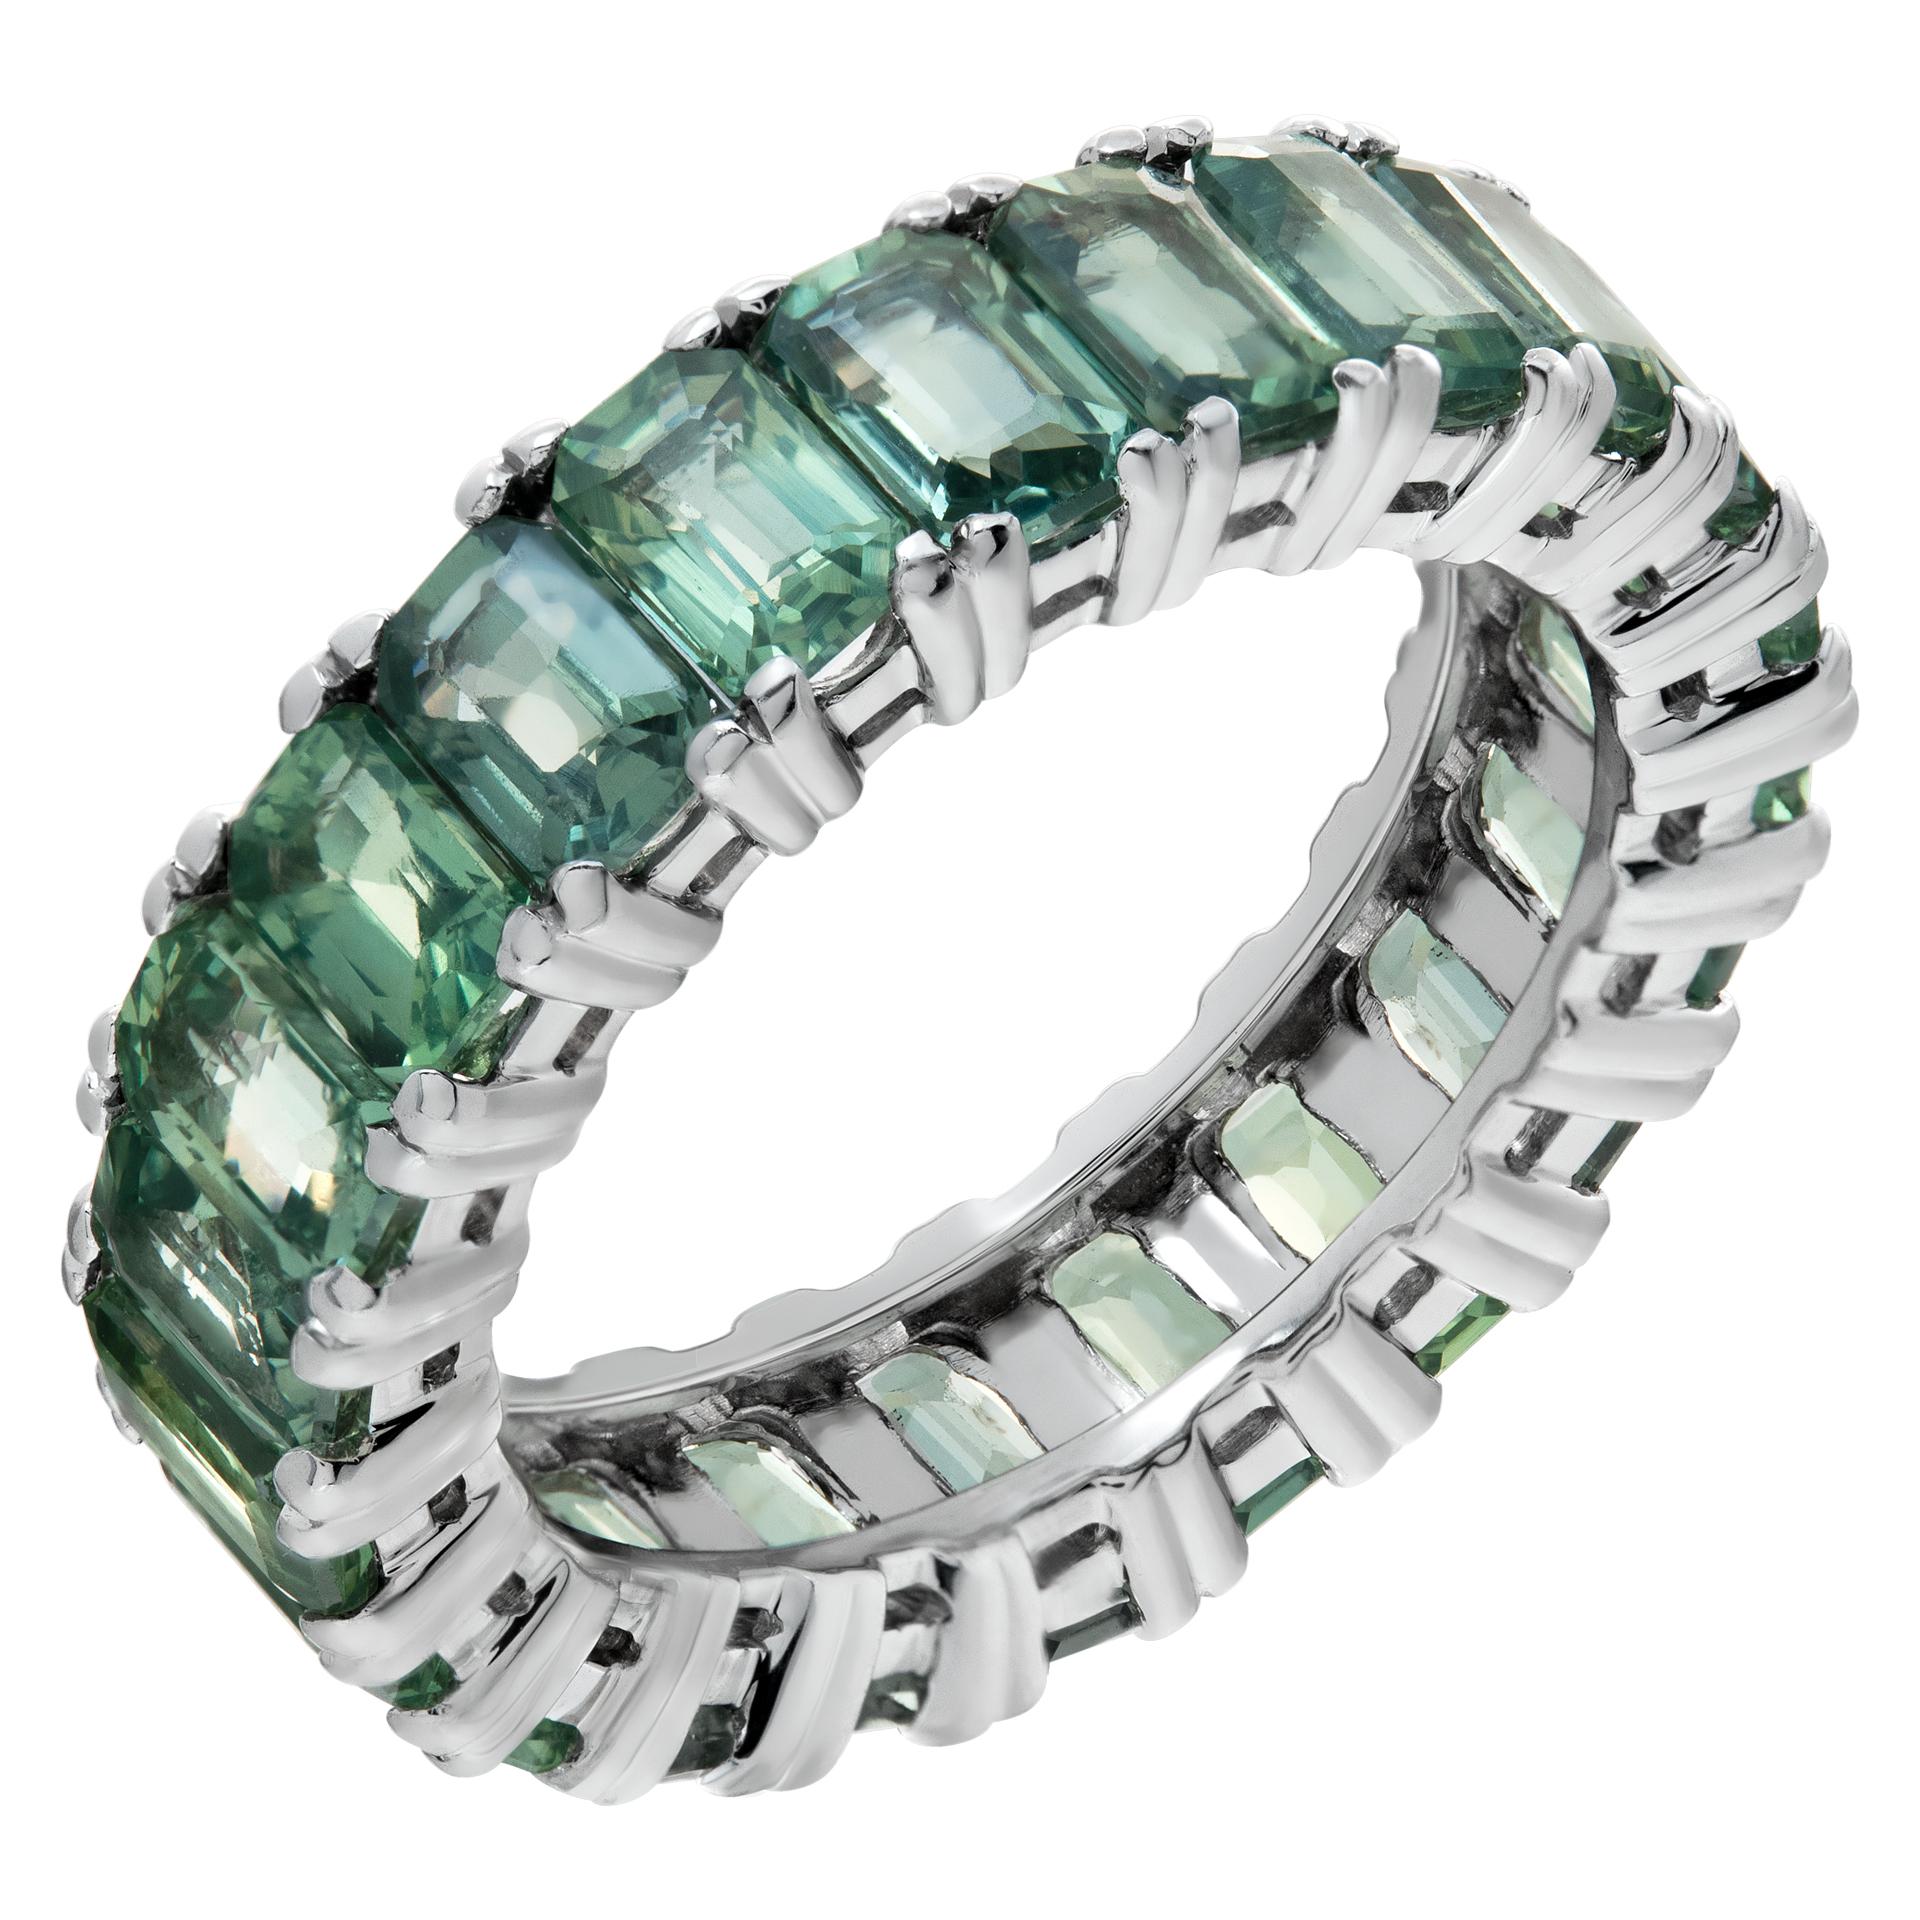 White gold green sapphire eternity band In Excellent Condition For Sale In Surfside, FL